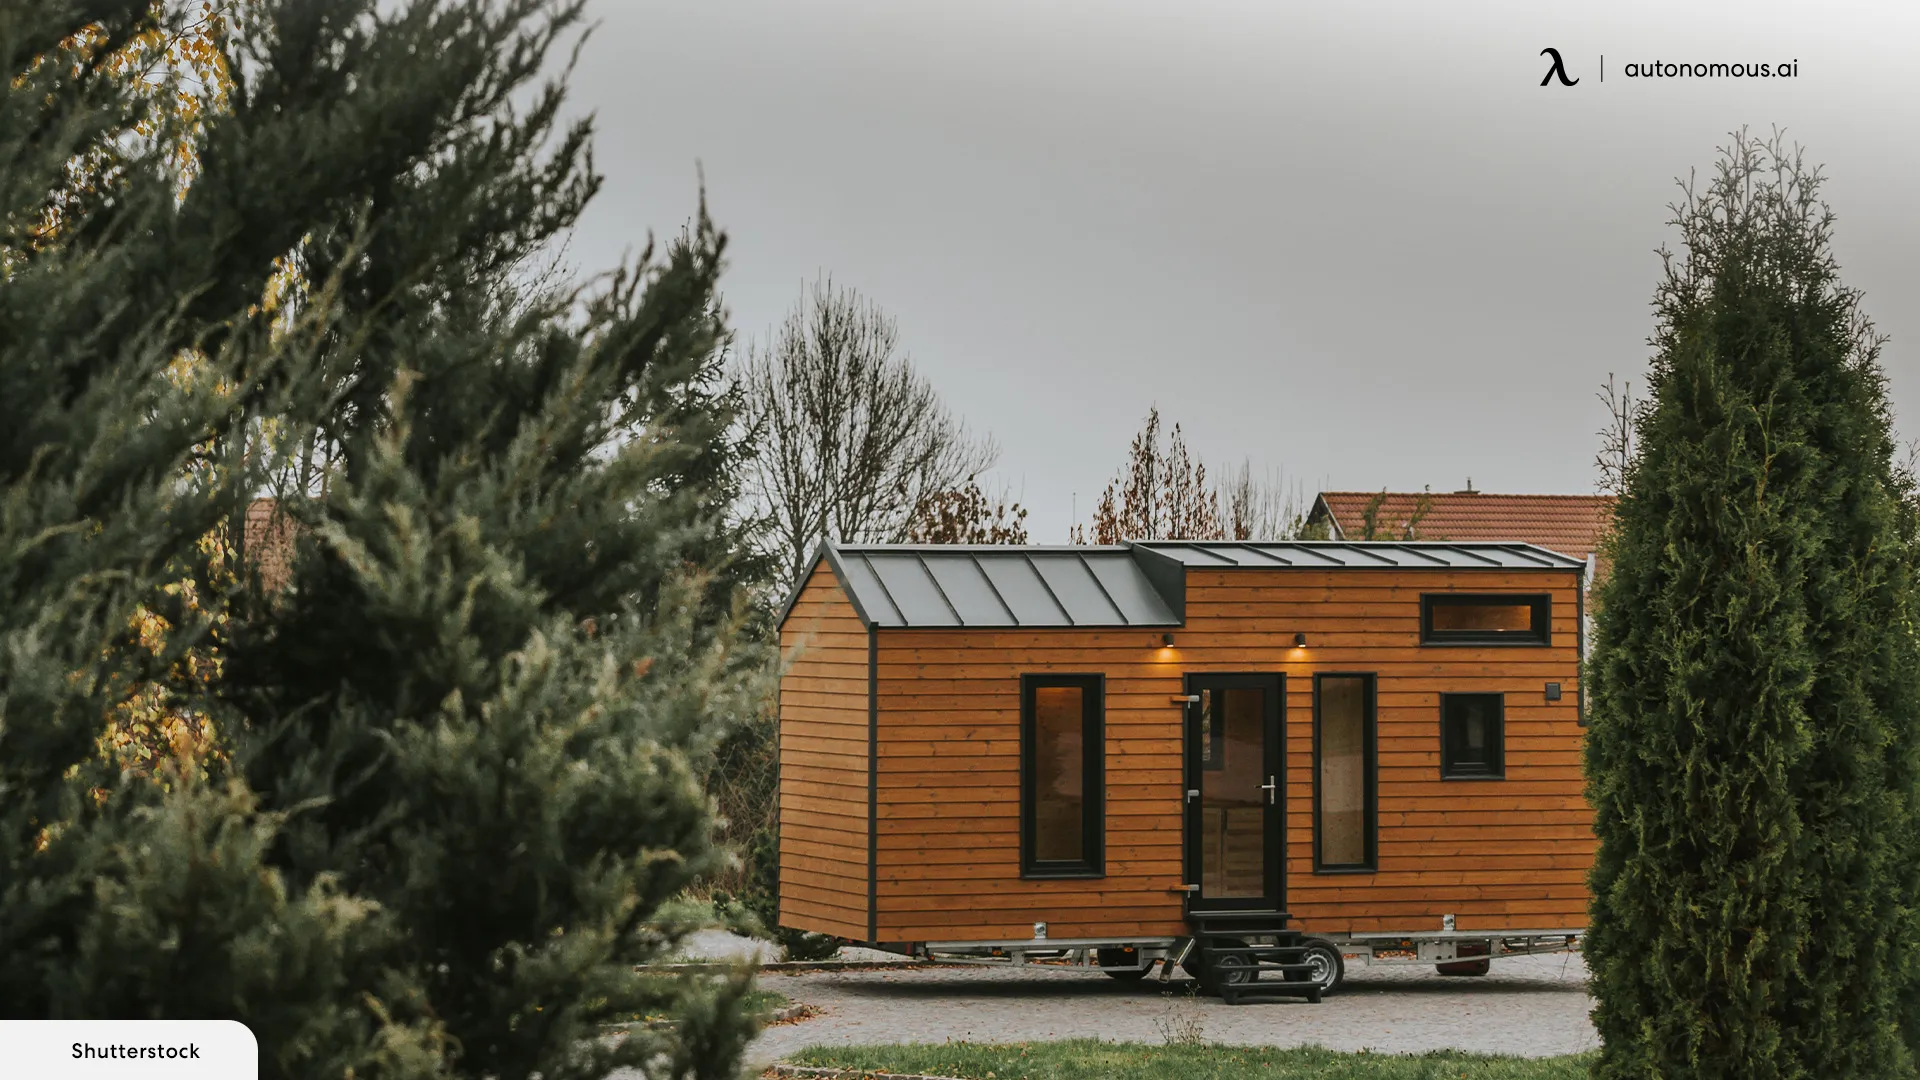 Are All Tiny Home Communities Legal?